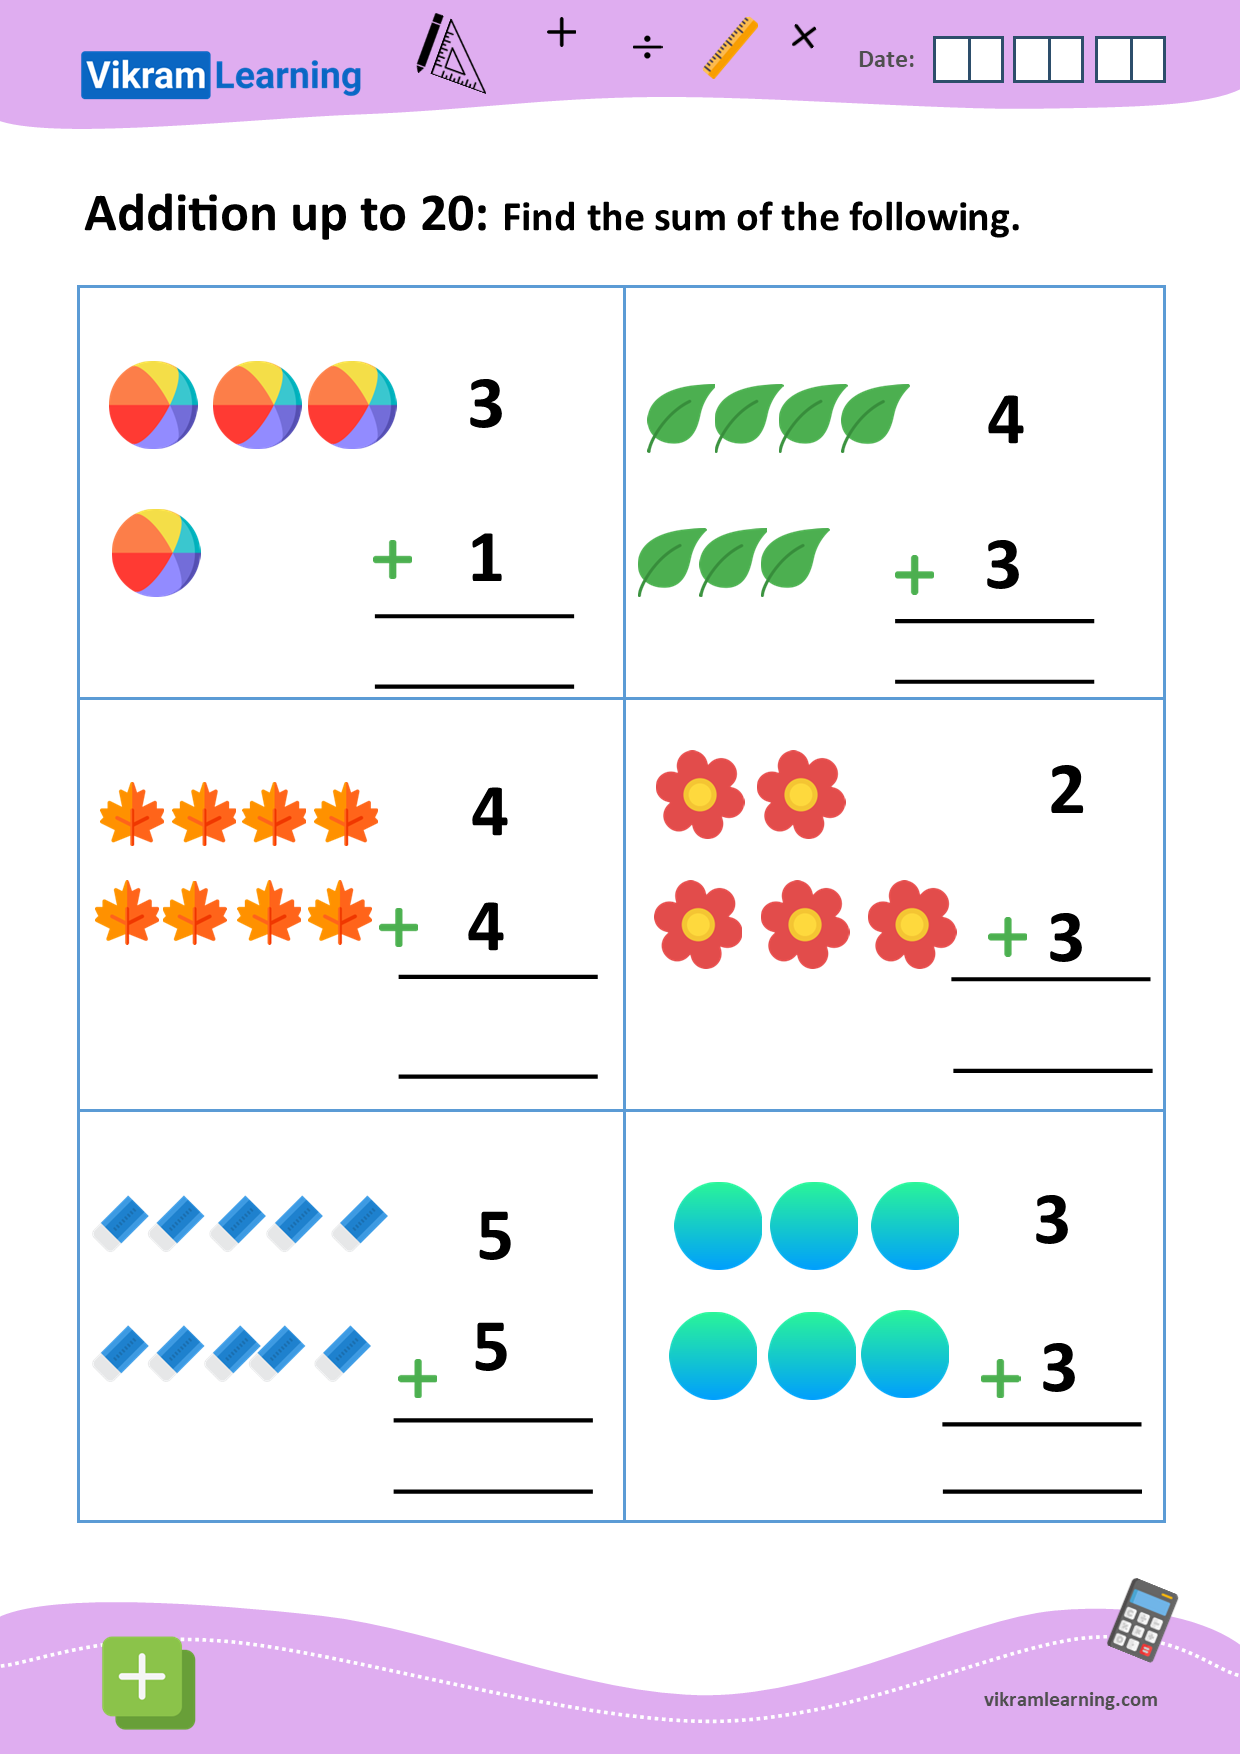 download-addition-up-to-20-using-pictures-worksheets-vikramlearning